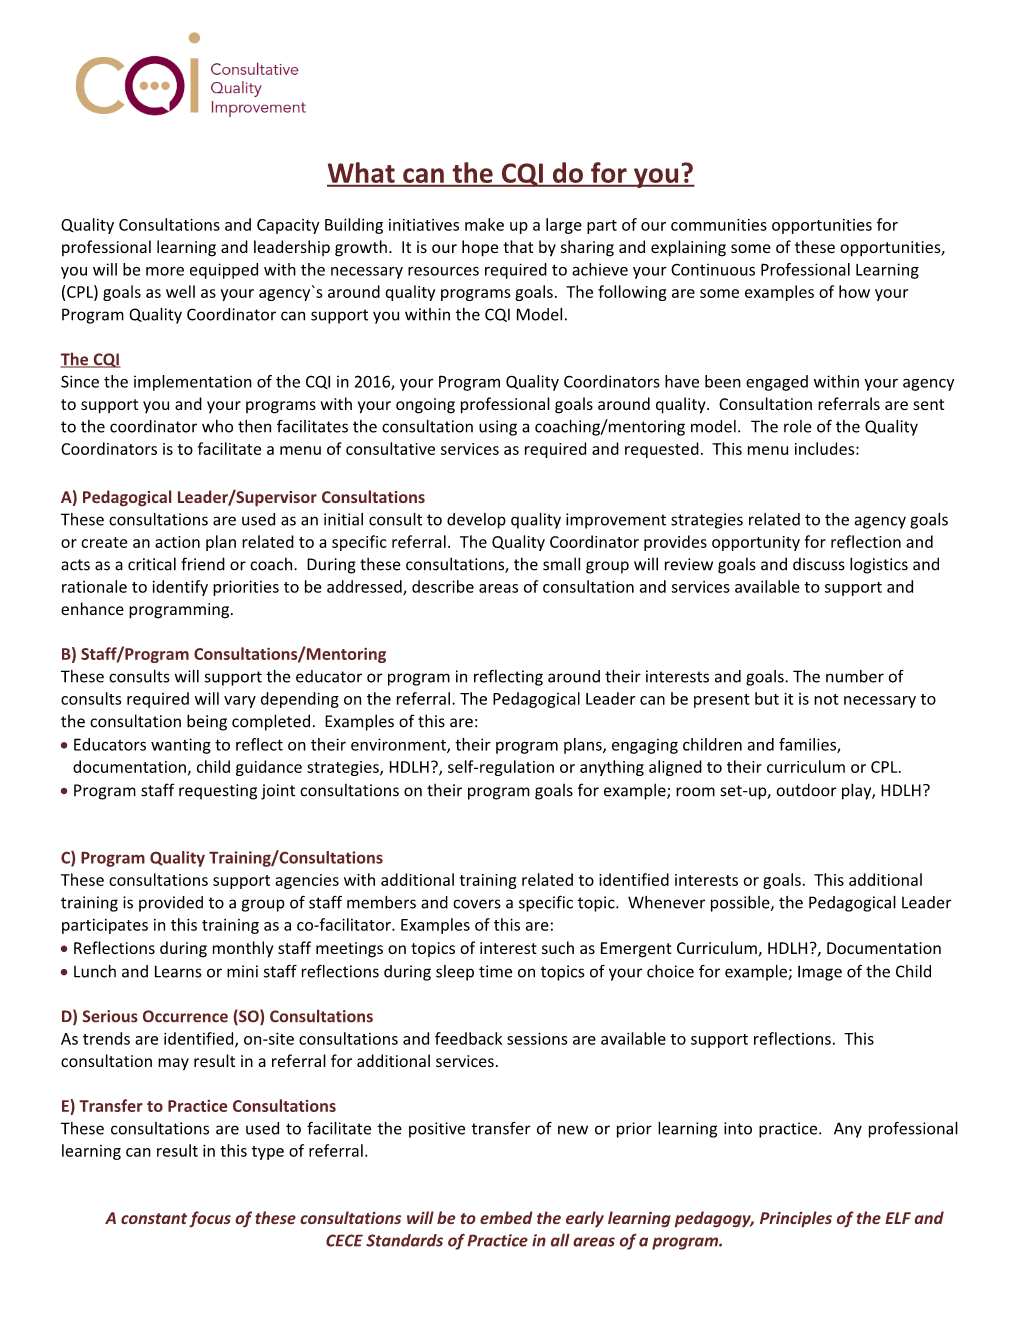 What Can the CQI Do for You?